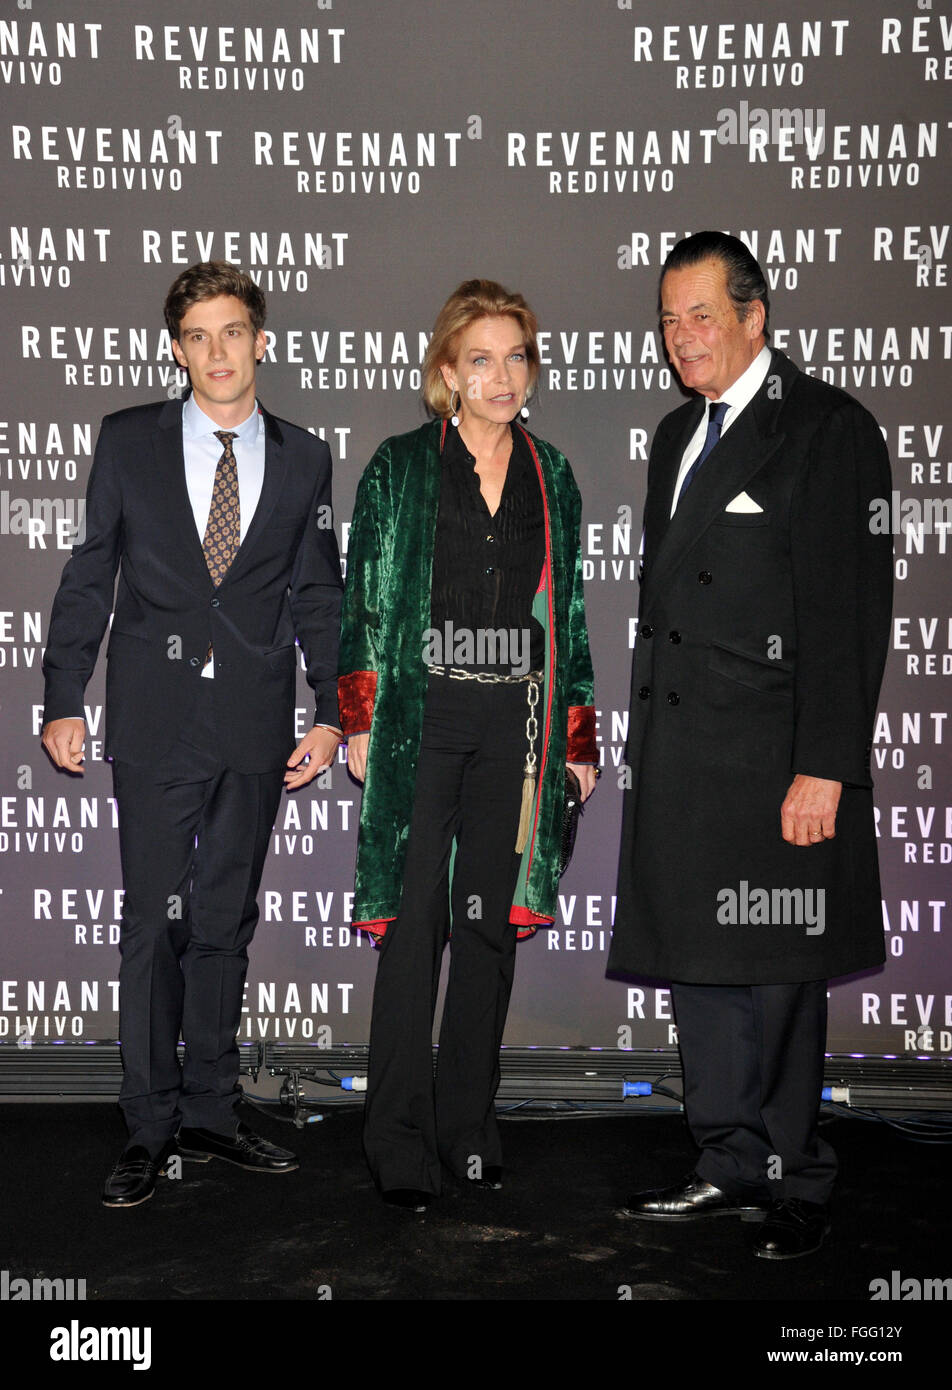 Rome, Red Carpet of the movie 'The Revenant'. Pictured: Principi of Windisch-Graetz  Featuring: Sophie Princess of Windisch-Graetz, Mariano Hugo Prince of Windisch-Graetz Where: Rome, Italy When: 15 Jan 2016 Stock Photo